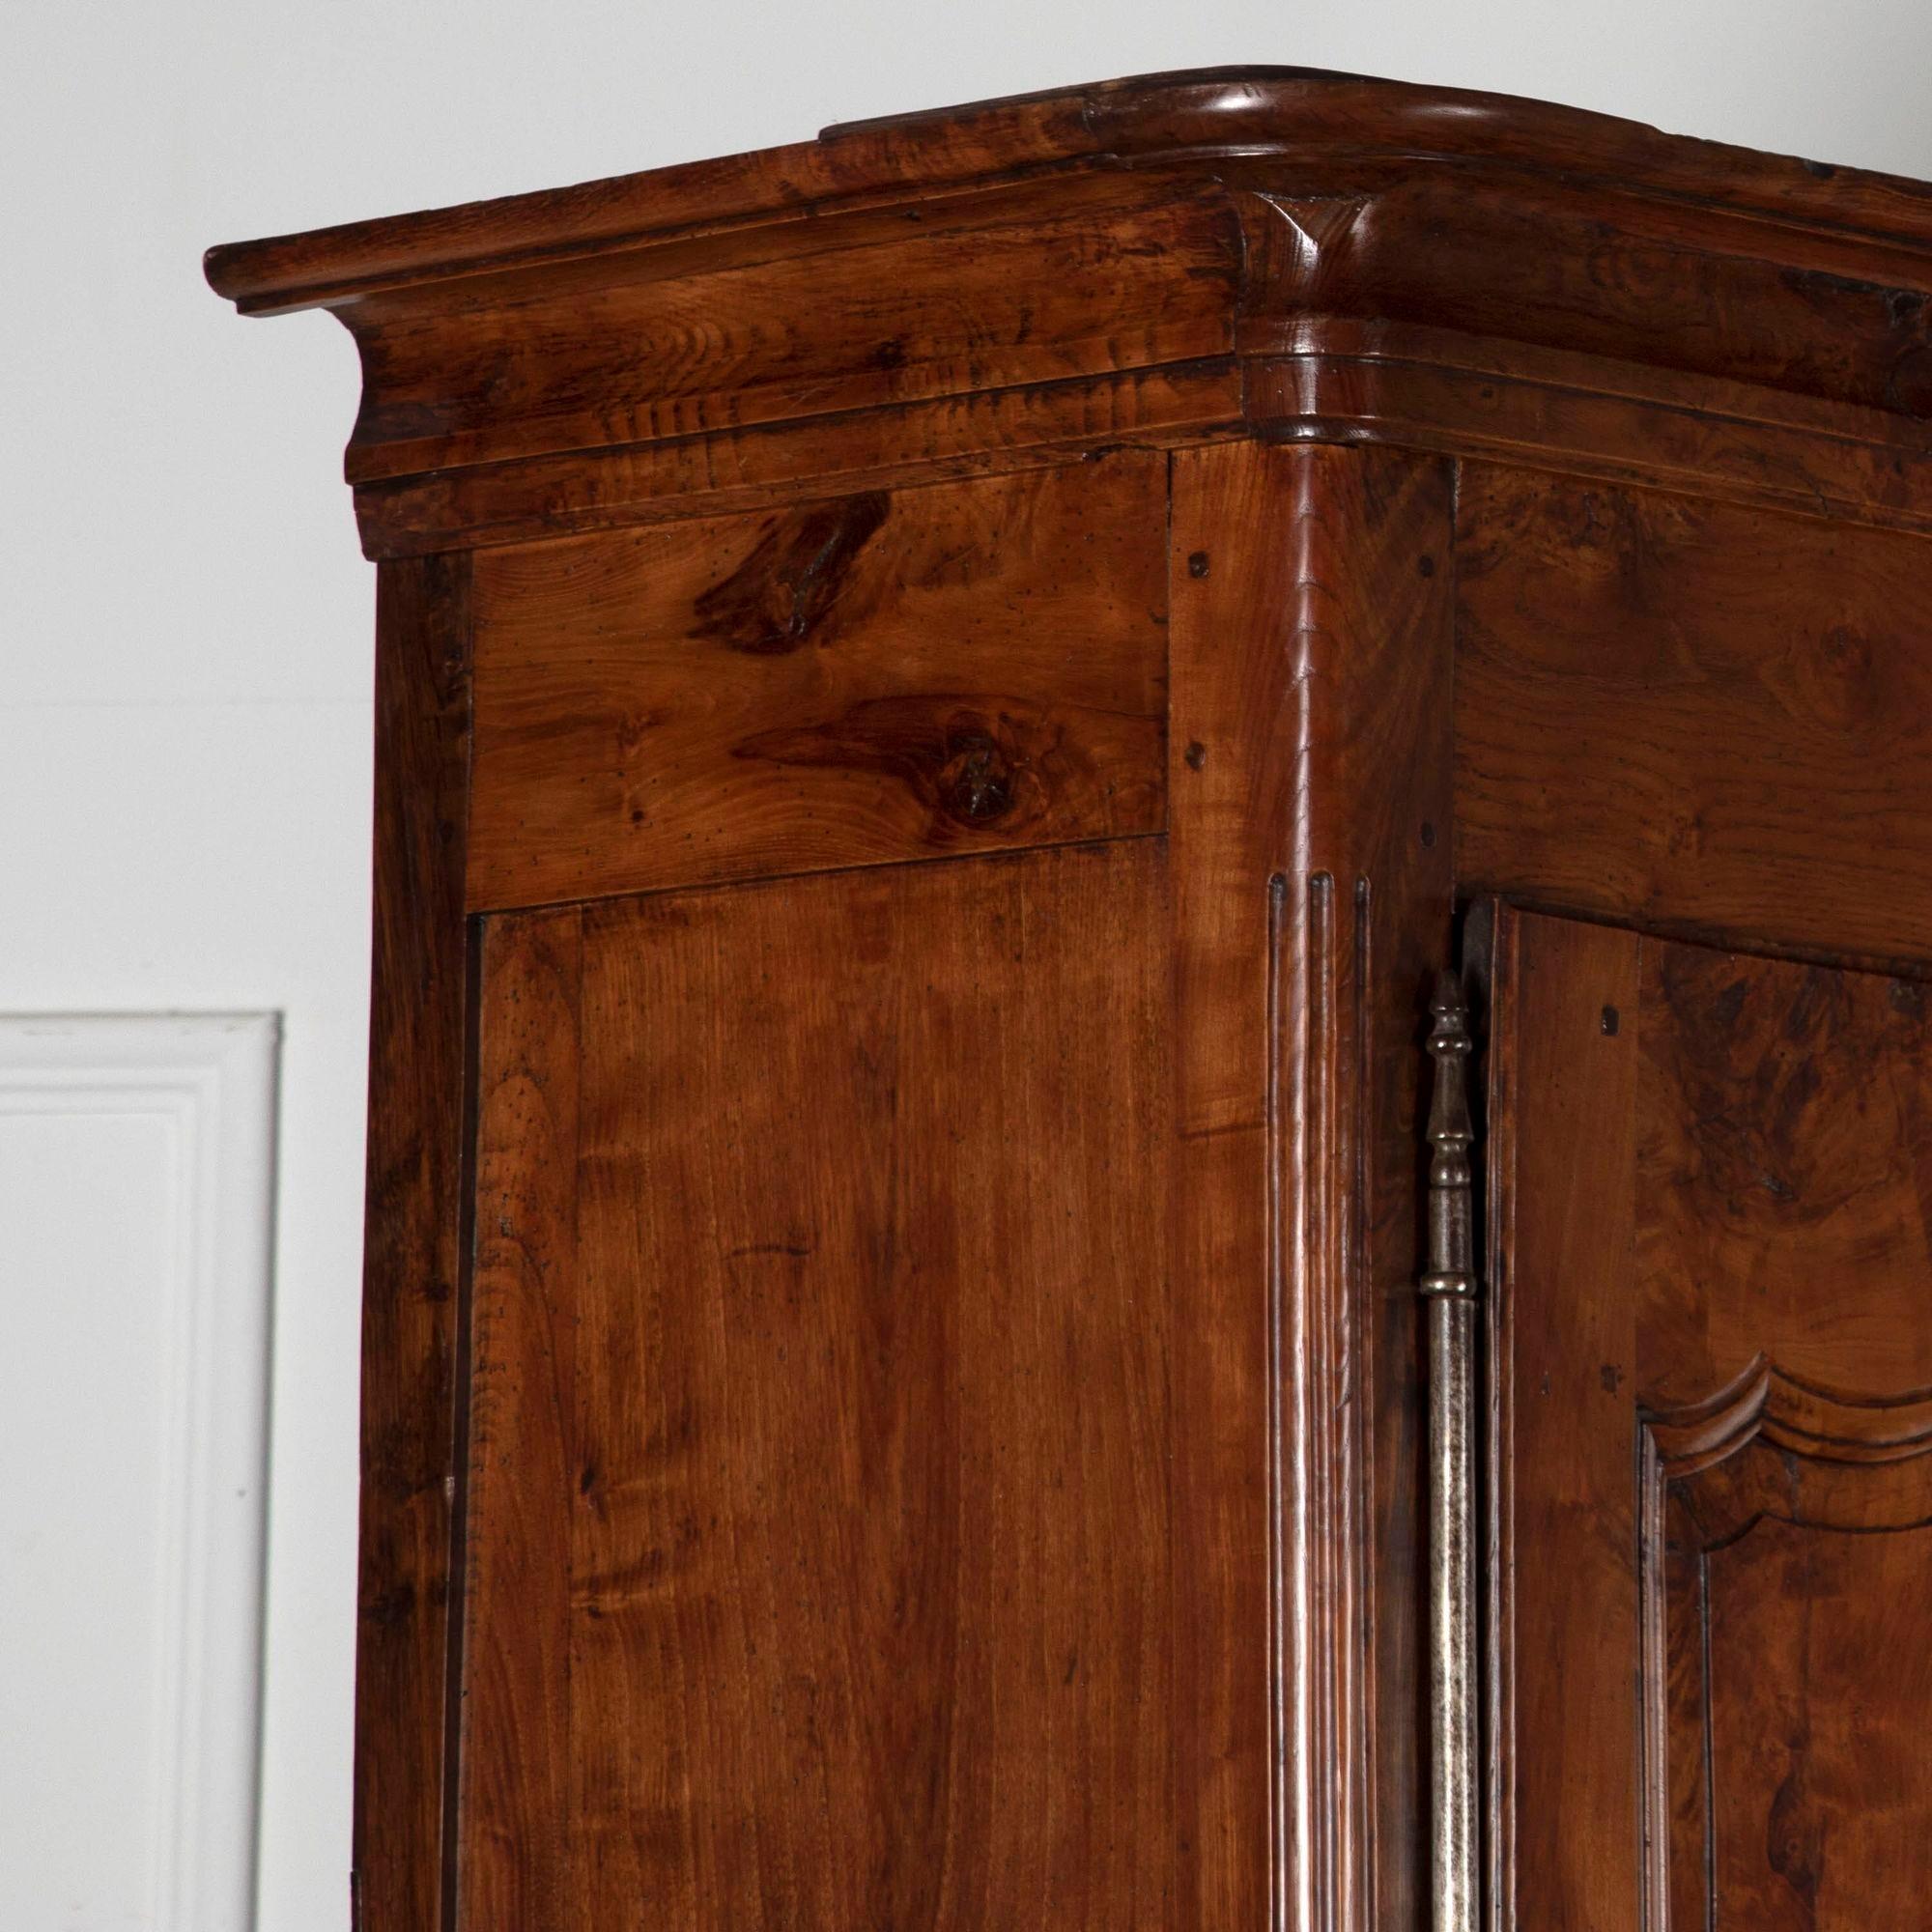 Fine example of a very useful cupboard.
This 19th Century buffet deux corps has the most wonderful colour coming from this rare burr elm.
Featuring some Fine detail carving this cupboard has been cleaned, waxed and has keys.